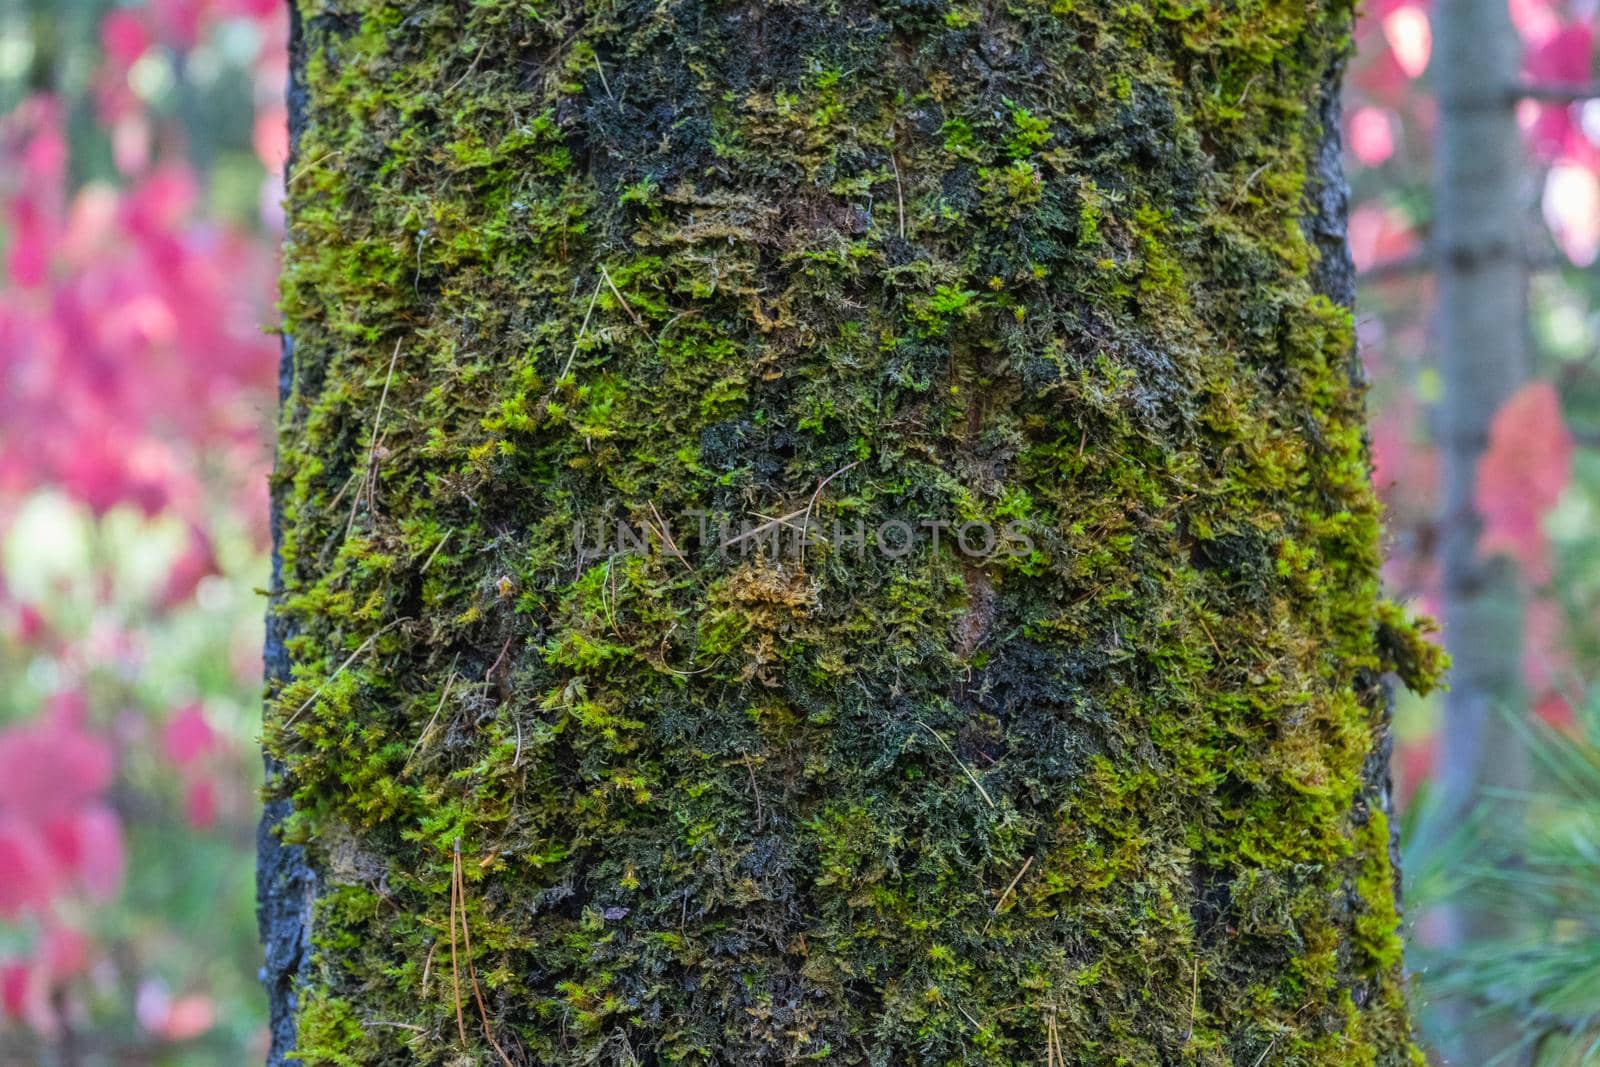 The trunk of the tree is covered with green moss.